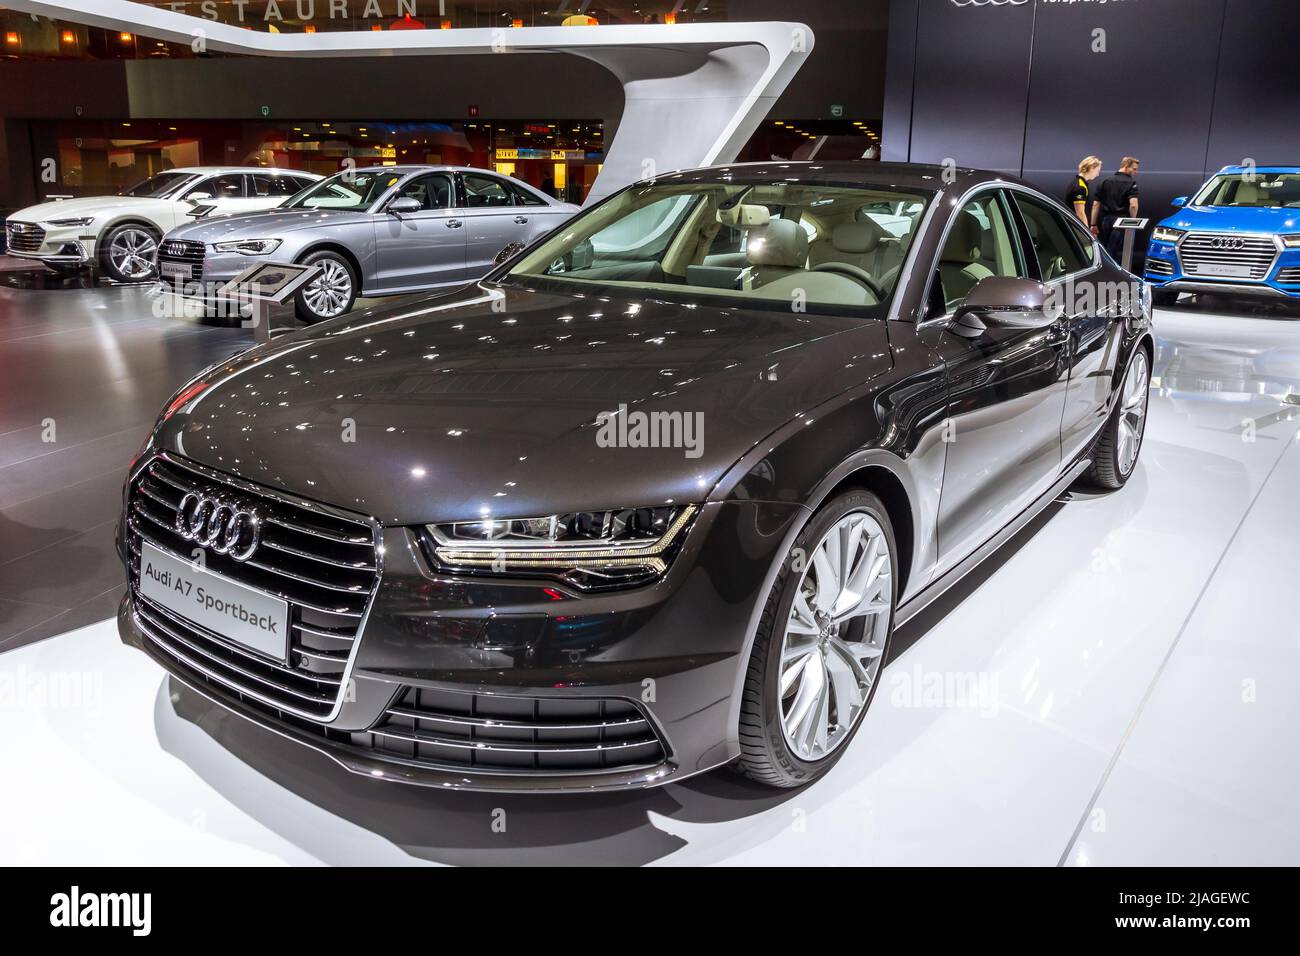 Audi A7 Sportback car at the Brussels Expo Autosalon motor show. Brussels - January 12, 2016. Stock Photo